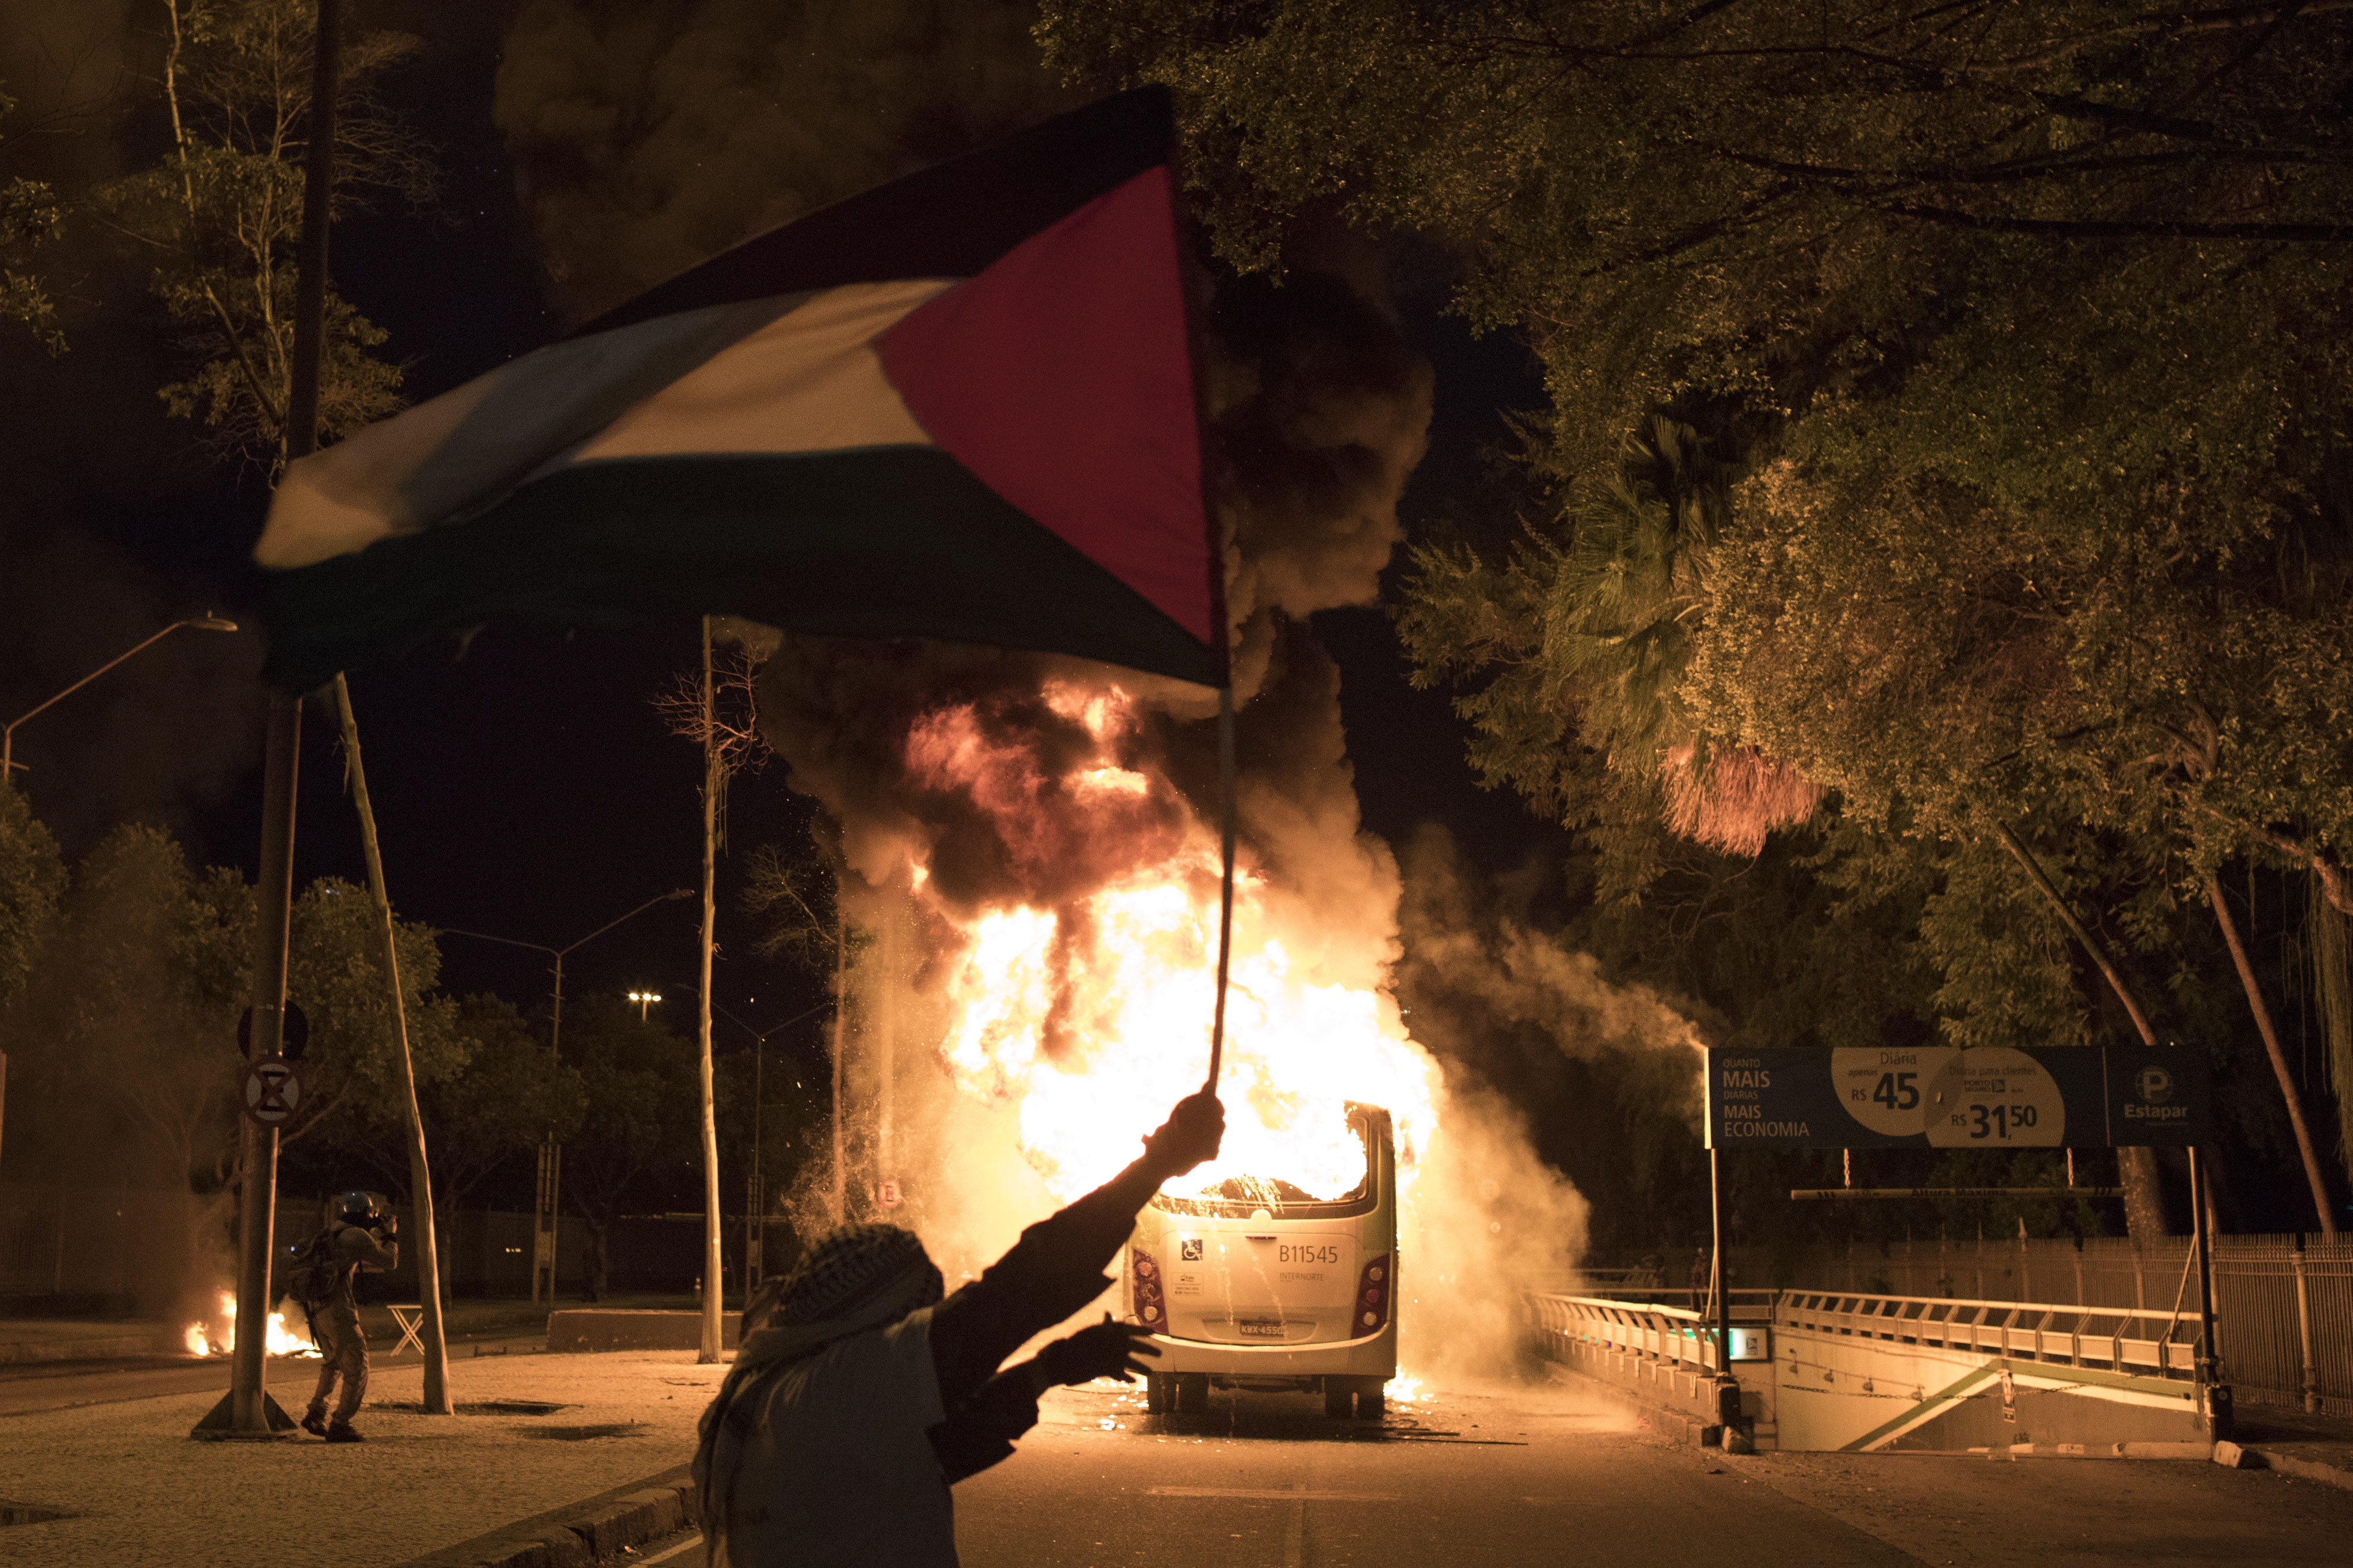 A masked demonstrator waves a Palestinian flag by a bus set fire by protesters after clashes with police broke out during a general strike in Rio de Janeiro, Brazil, Friday, April, 28, 2017. Public transport largely came to a halt across much of Brazil on Friday and protesters blocked roads and scuffled with police as part of a general strike to protest proposed changes to labor laws and the pension system. (AP Photo/Leo Correa)